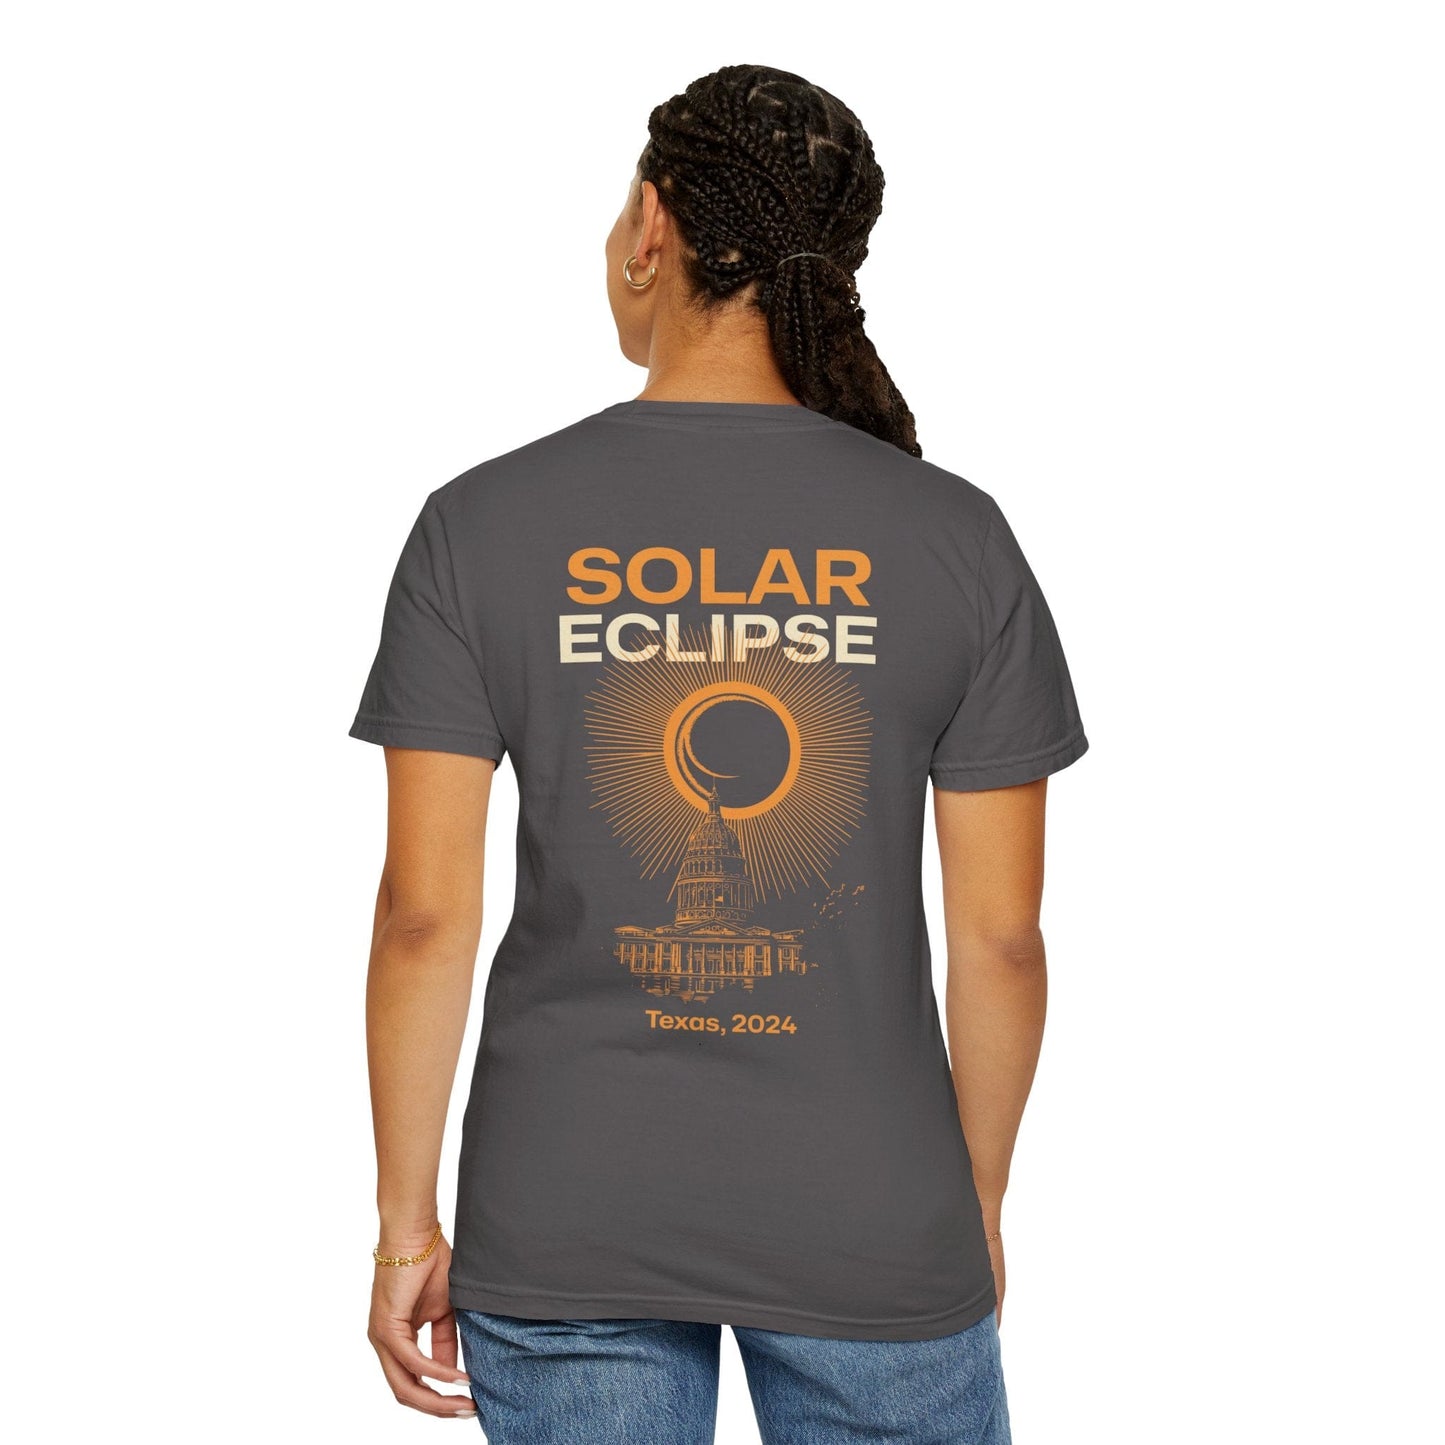 Texas Total Solar Eclipse 4.08.24 USA Shirt Adult S-4XL - Black/Graphite, Path of Totality Shirt, Astronomy Lovers T-shirt